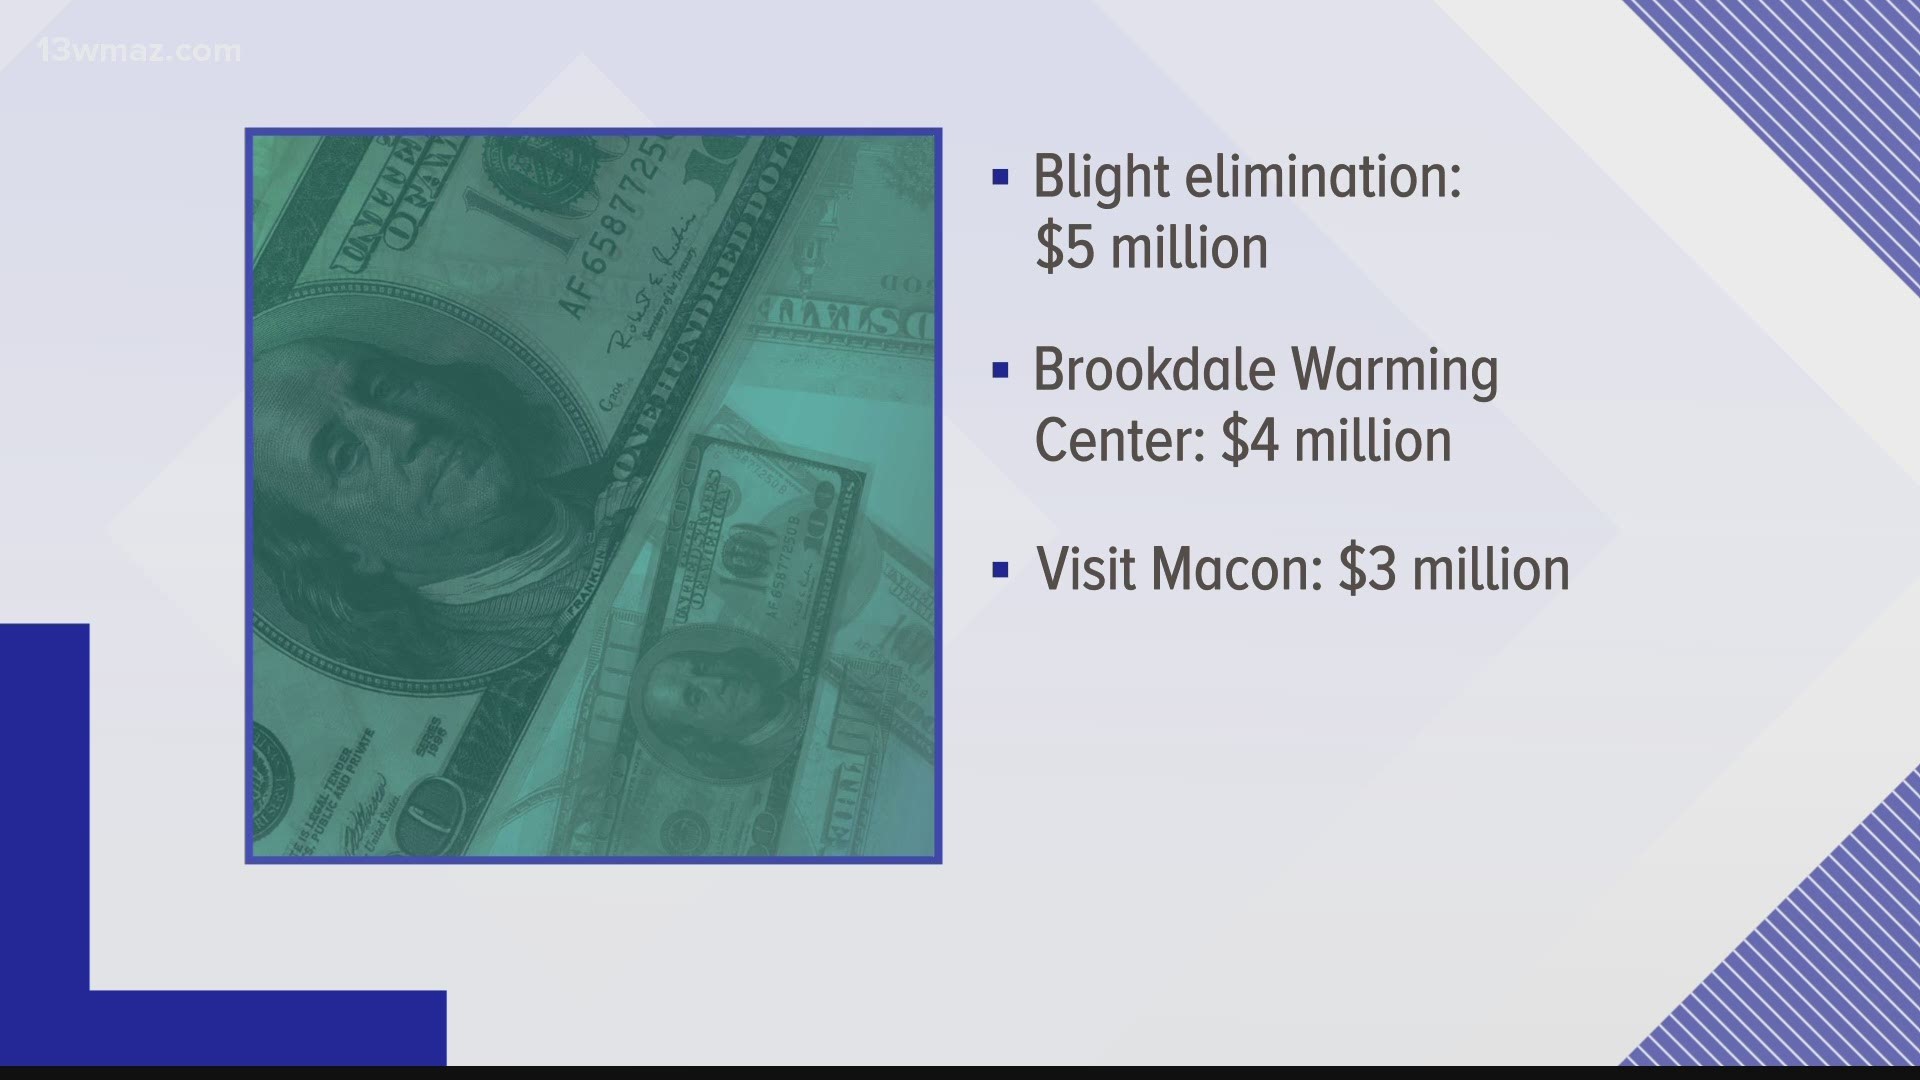 Bibb County leaders will talk about whether to put $4 million of the funds toward the Brookdale Warming Center